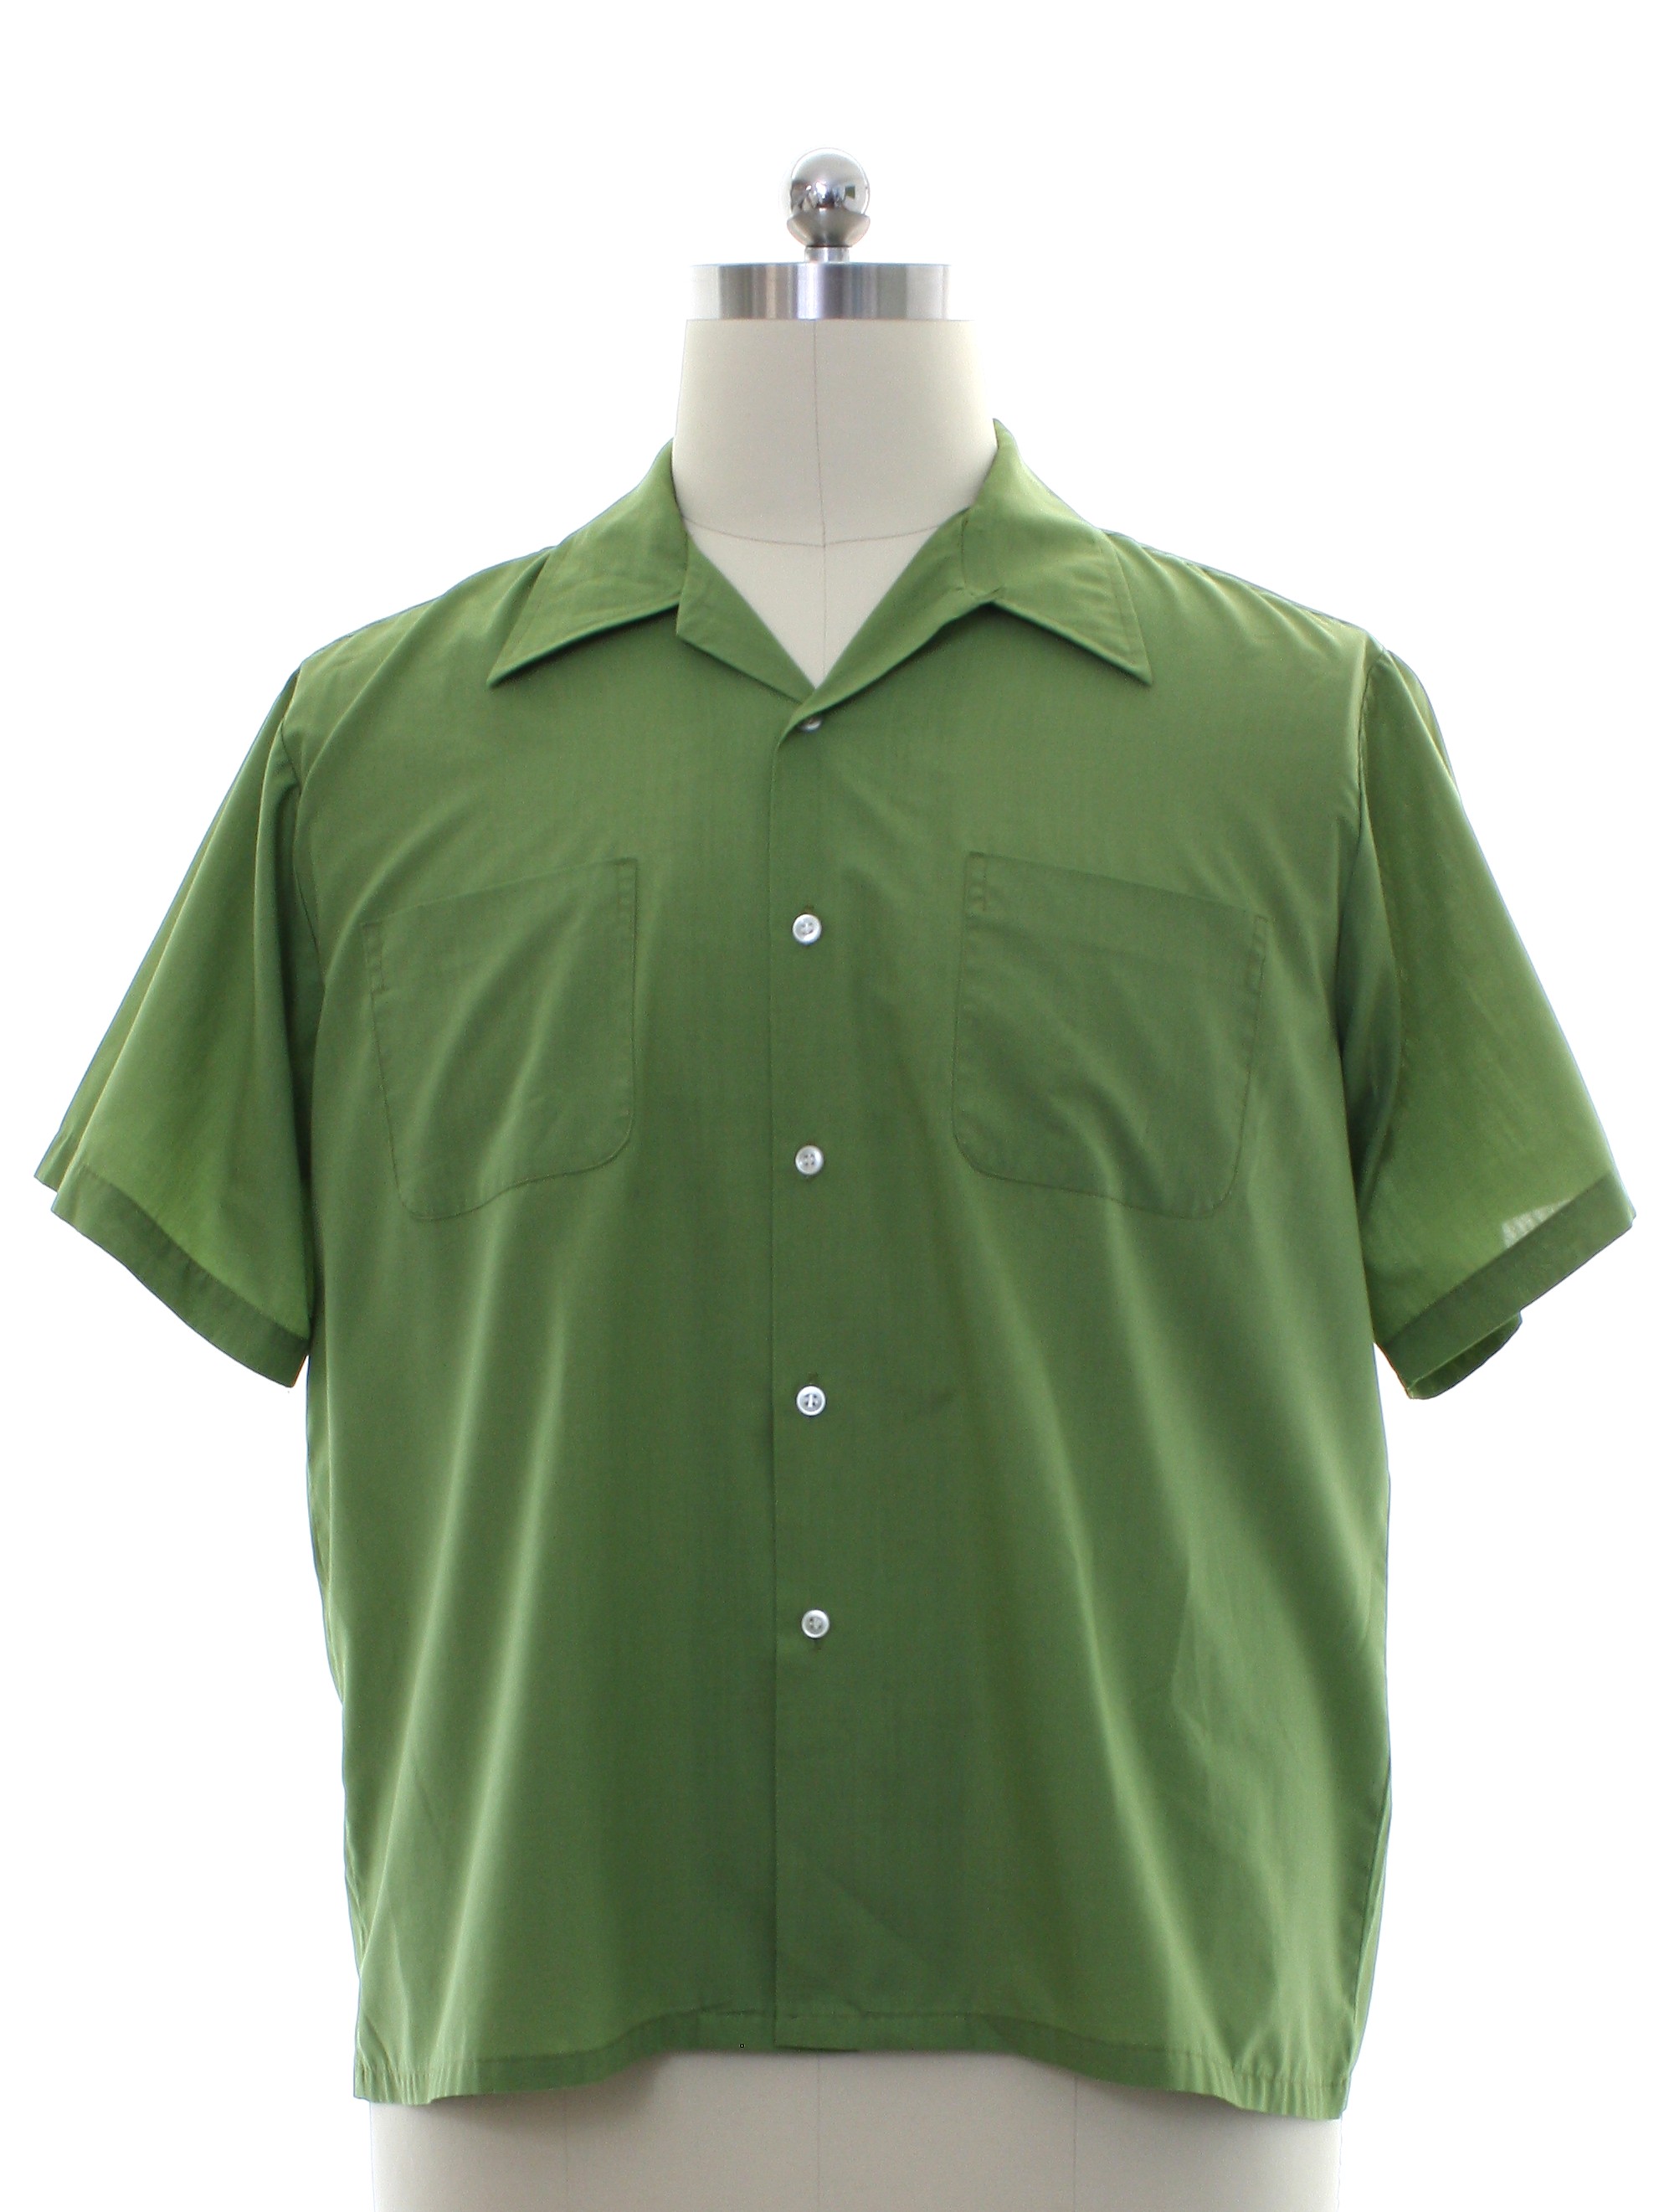 Vintage 1960's Shirt: Late 60s -Sears Perma Prest- Mens olive green ...